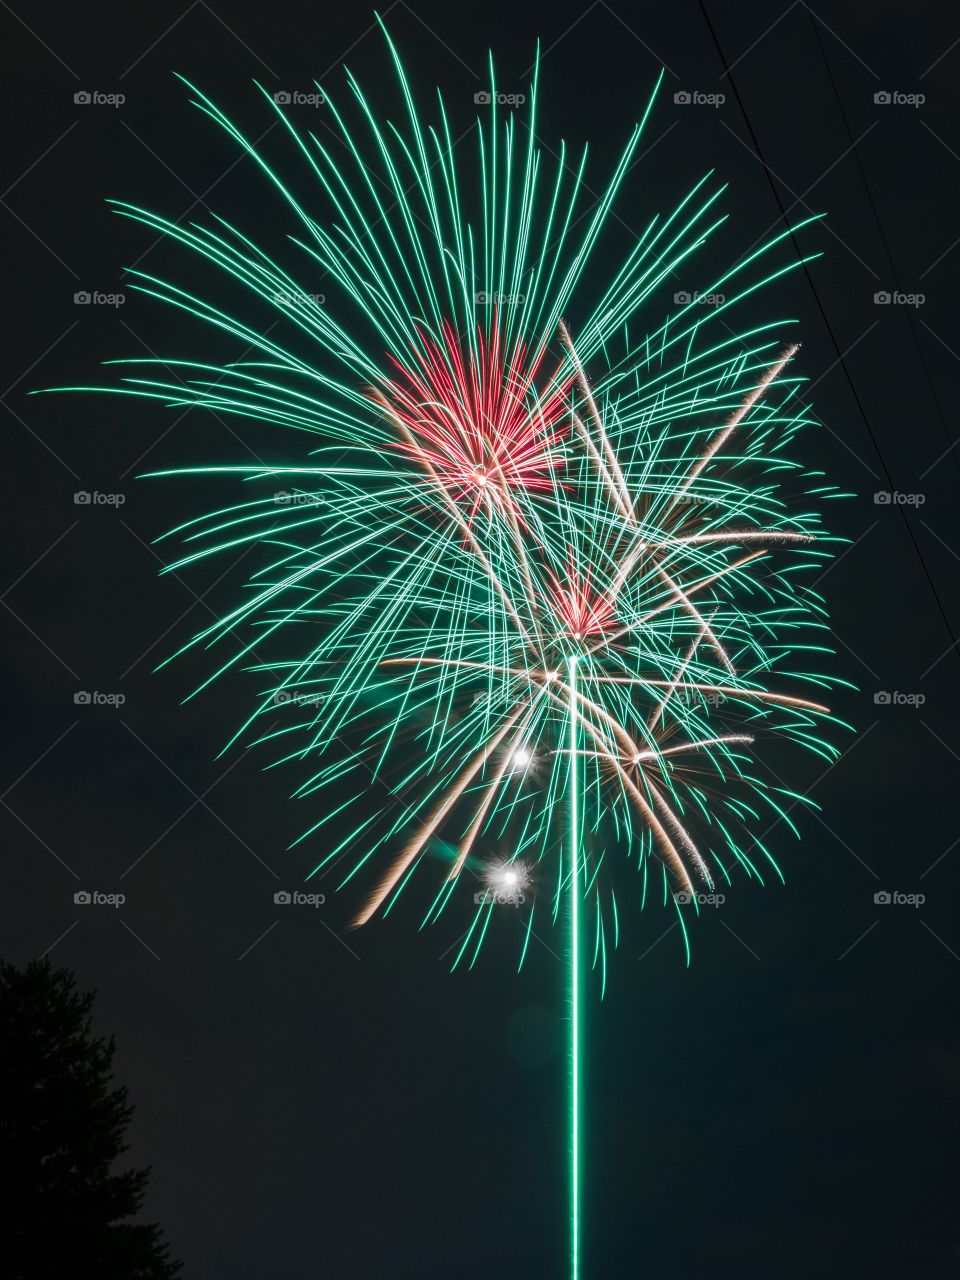 Vertical photo of greens and red fireworks exploding in the night sky with a tree silhouetted on the lower left